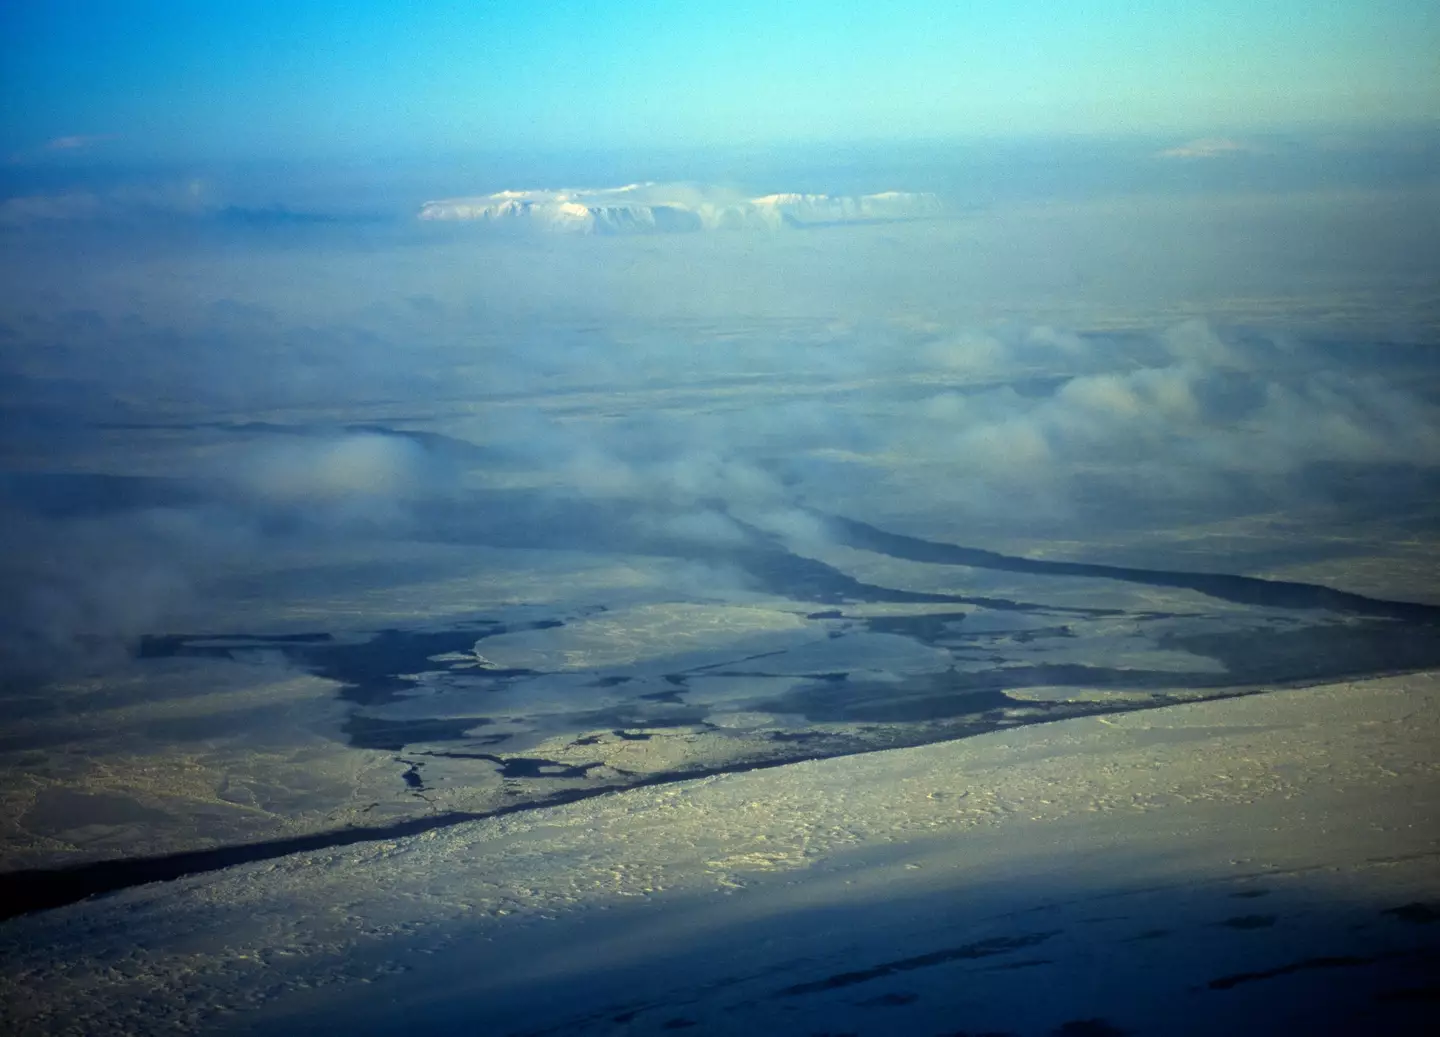 A wintry aerial shot of both Big and Little Diomede.